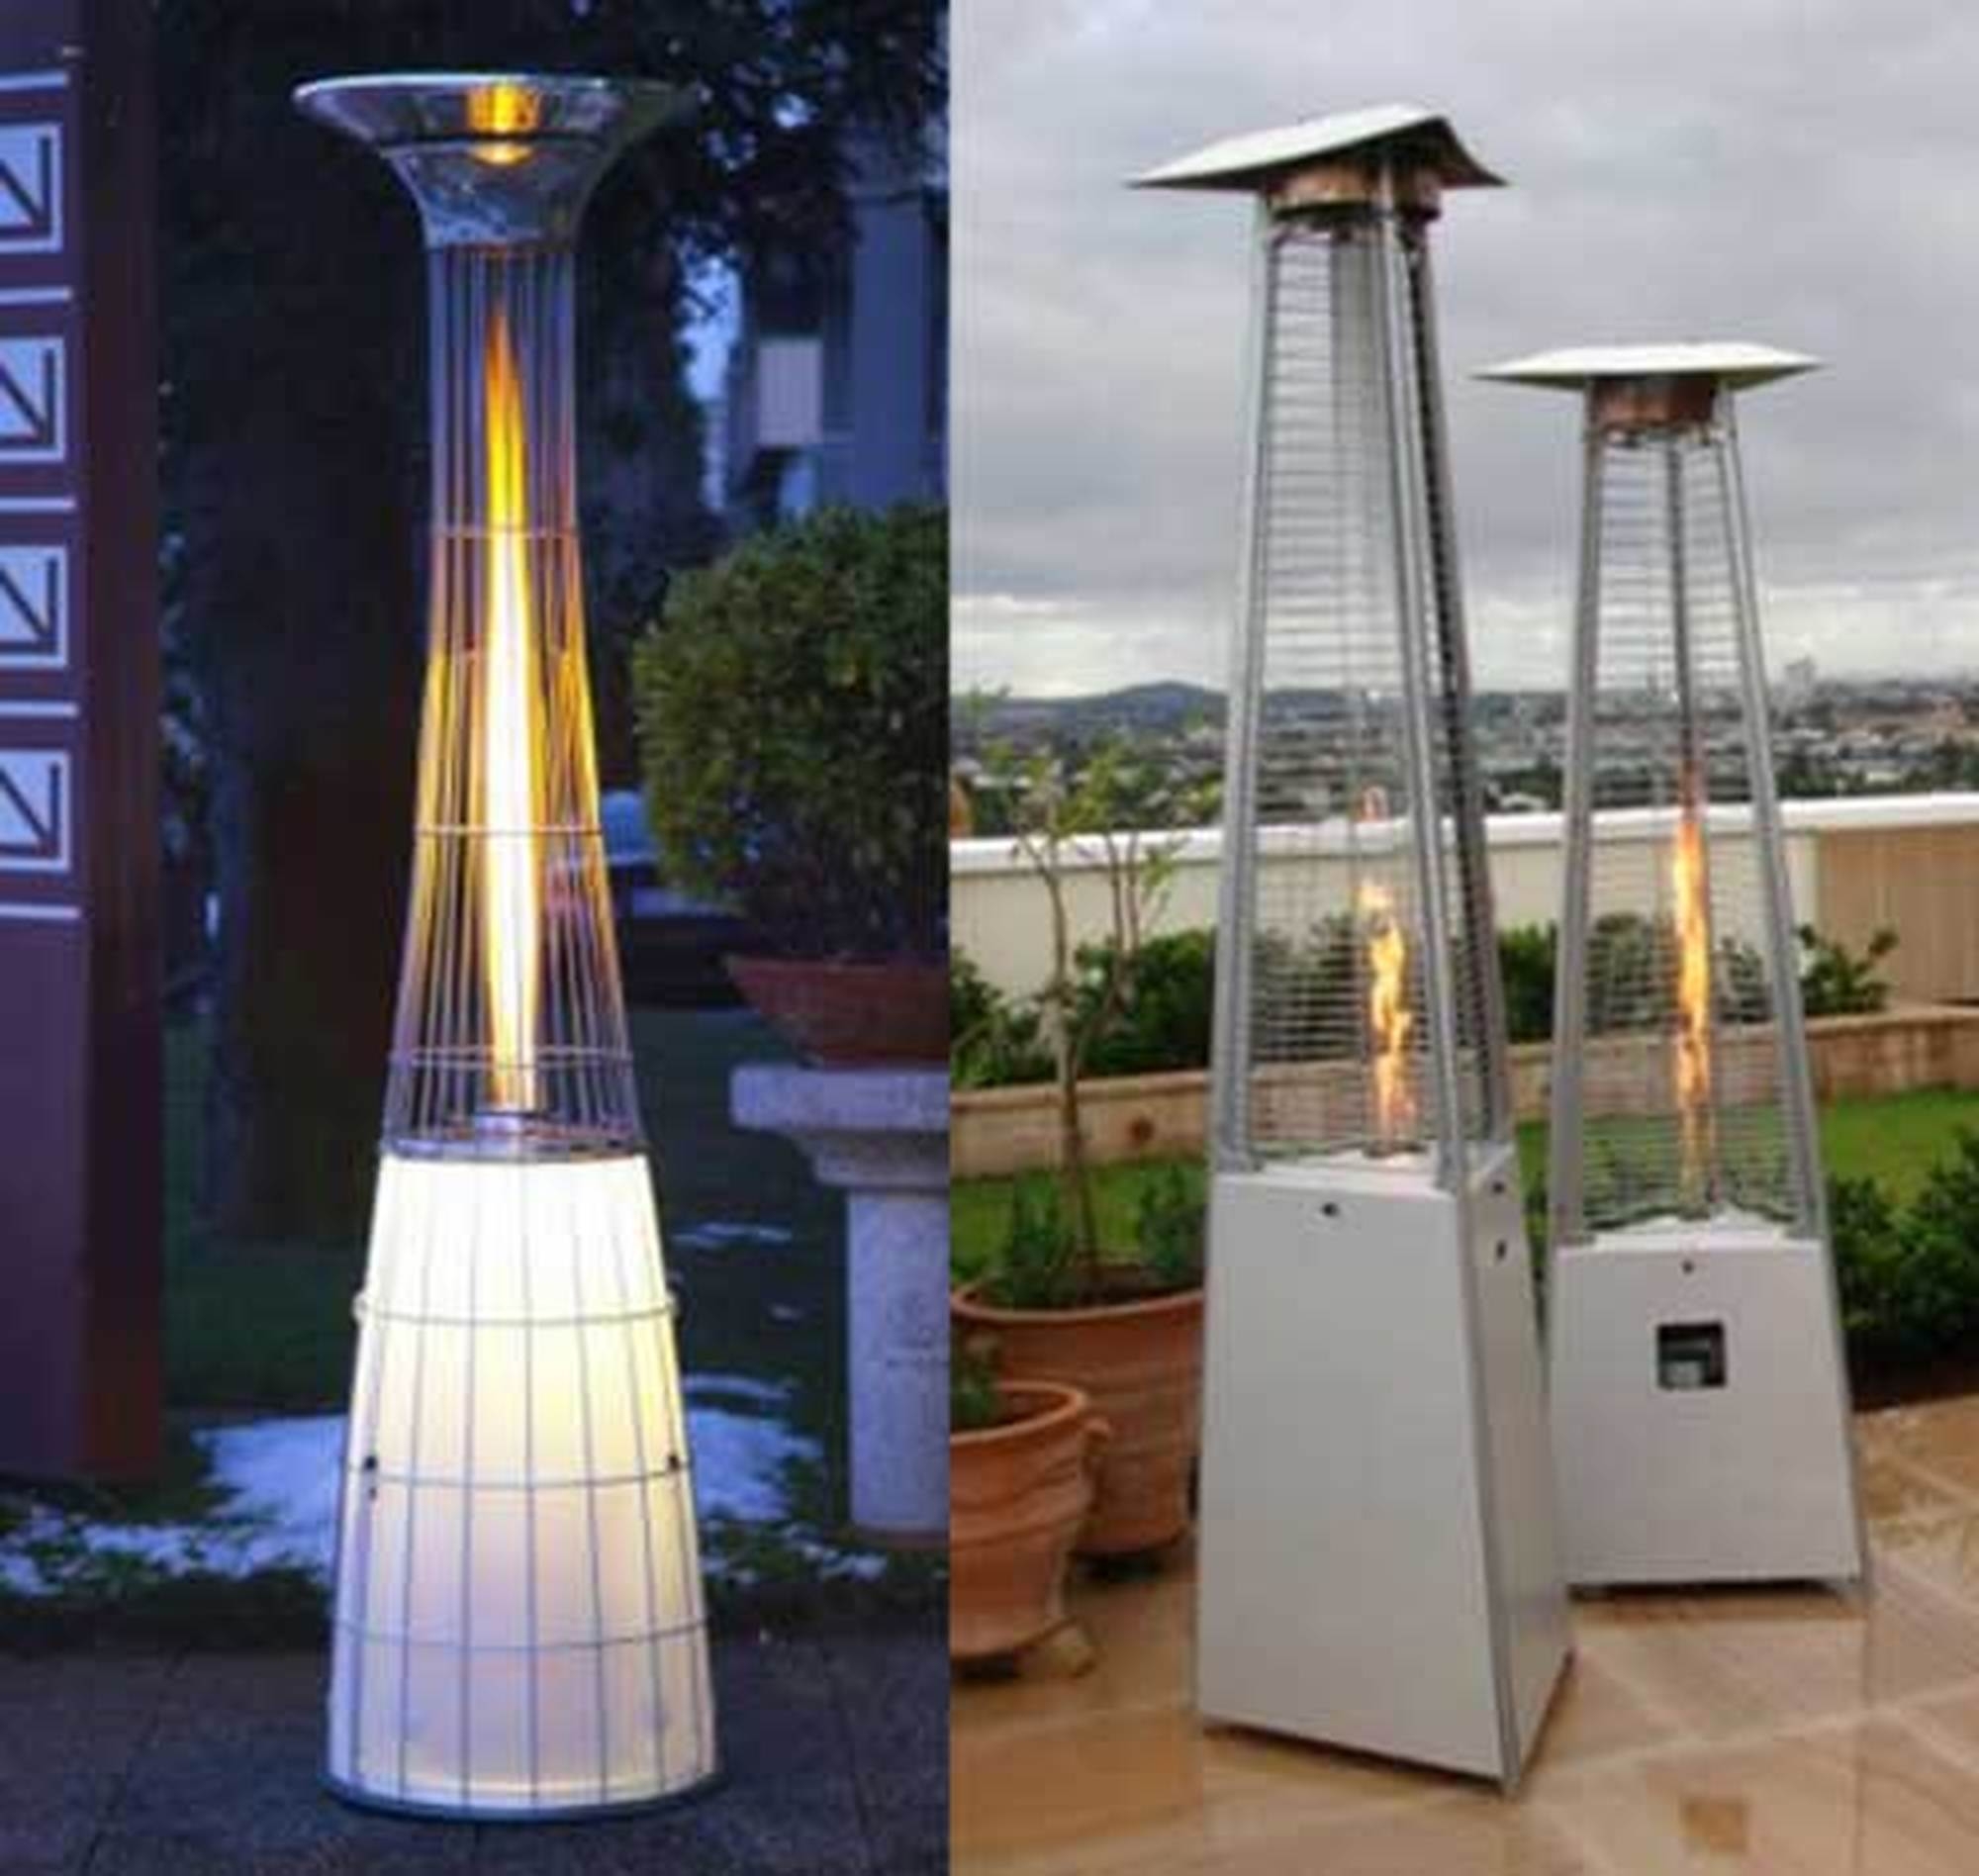 These outdoor space gas heaters by alpina let you soak